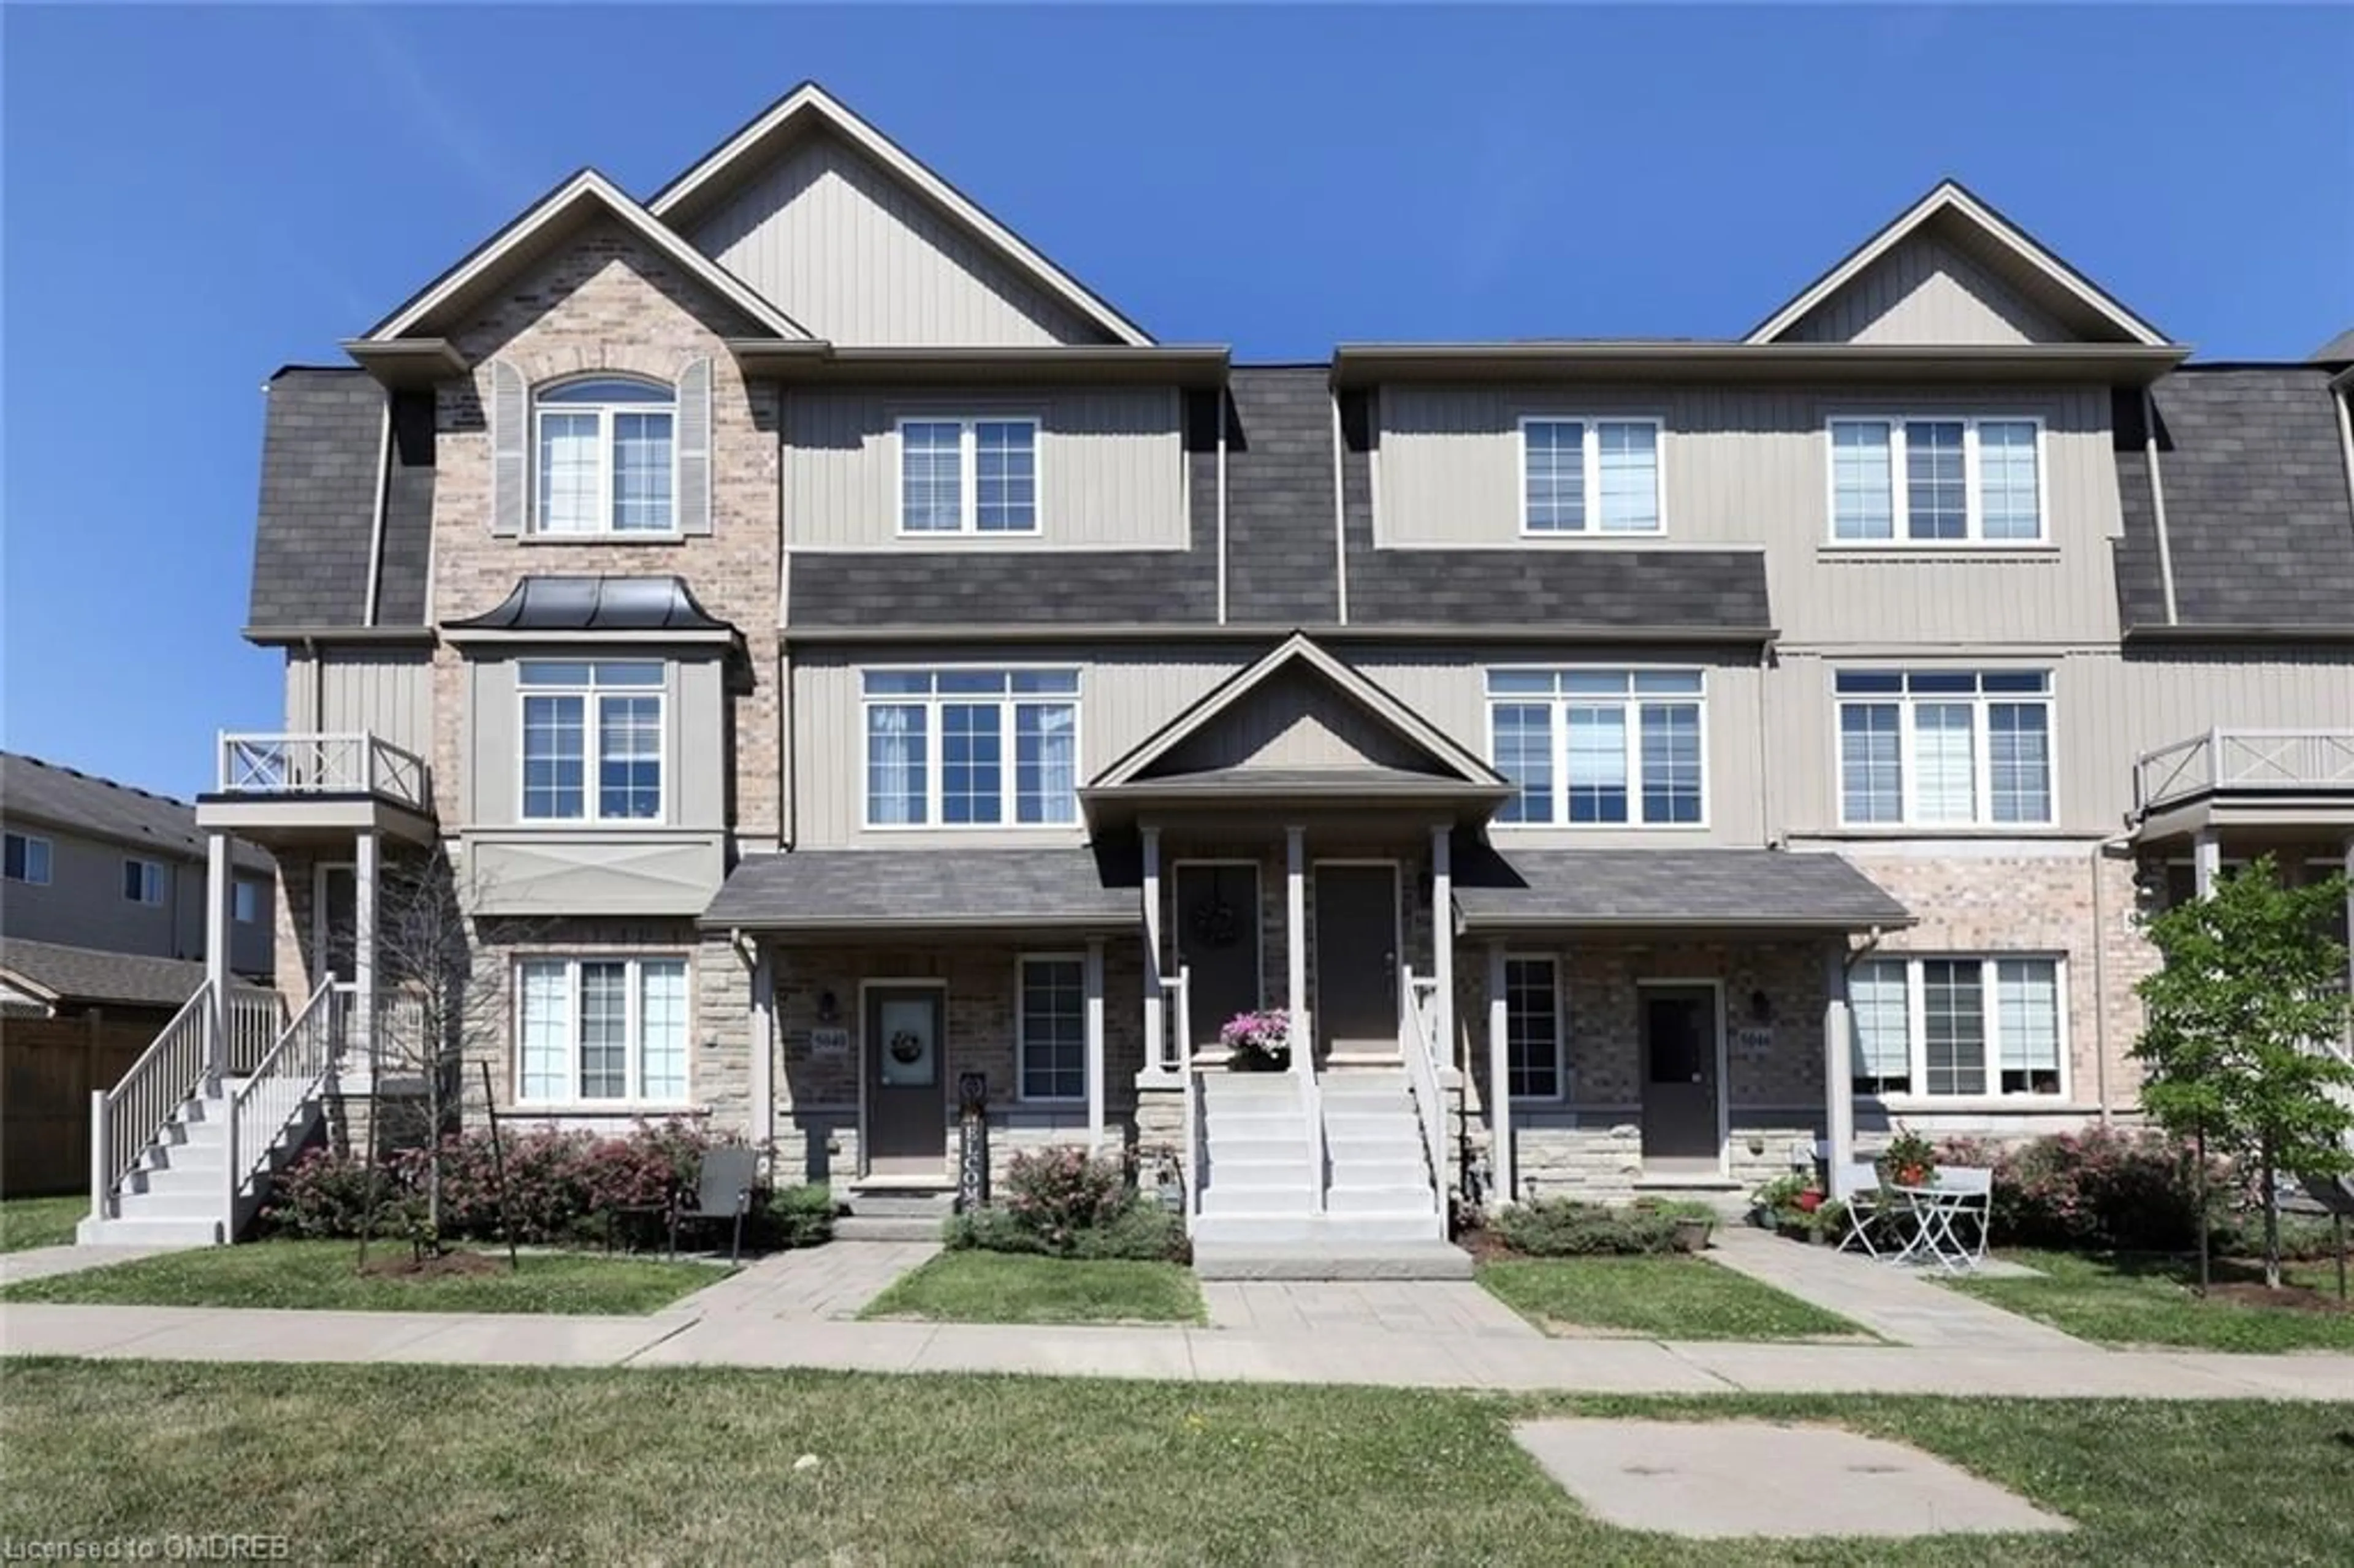 A pic from exterior of the house or condo for 5042 Serena Dr #3, Beamsville Ontario L0R 1B2